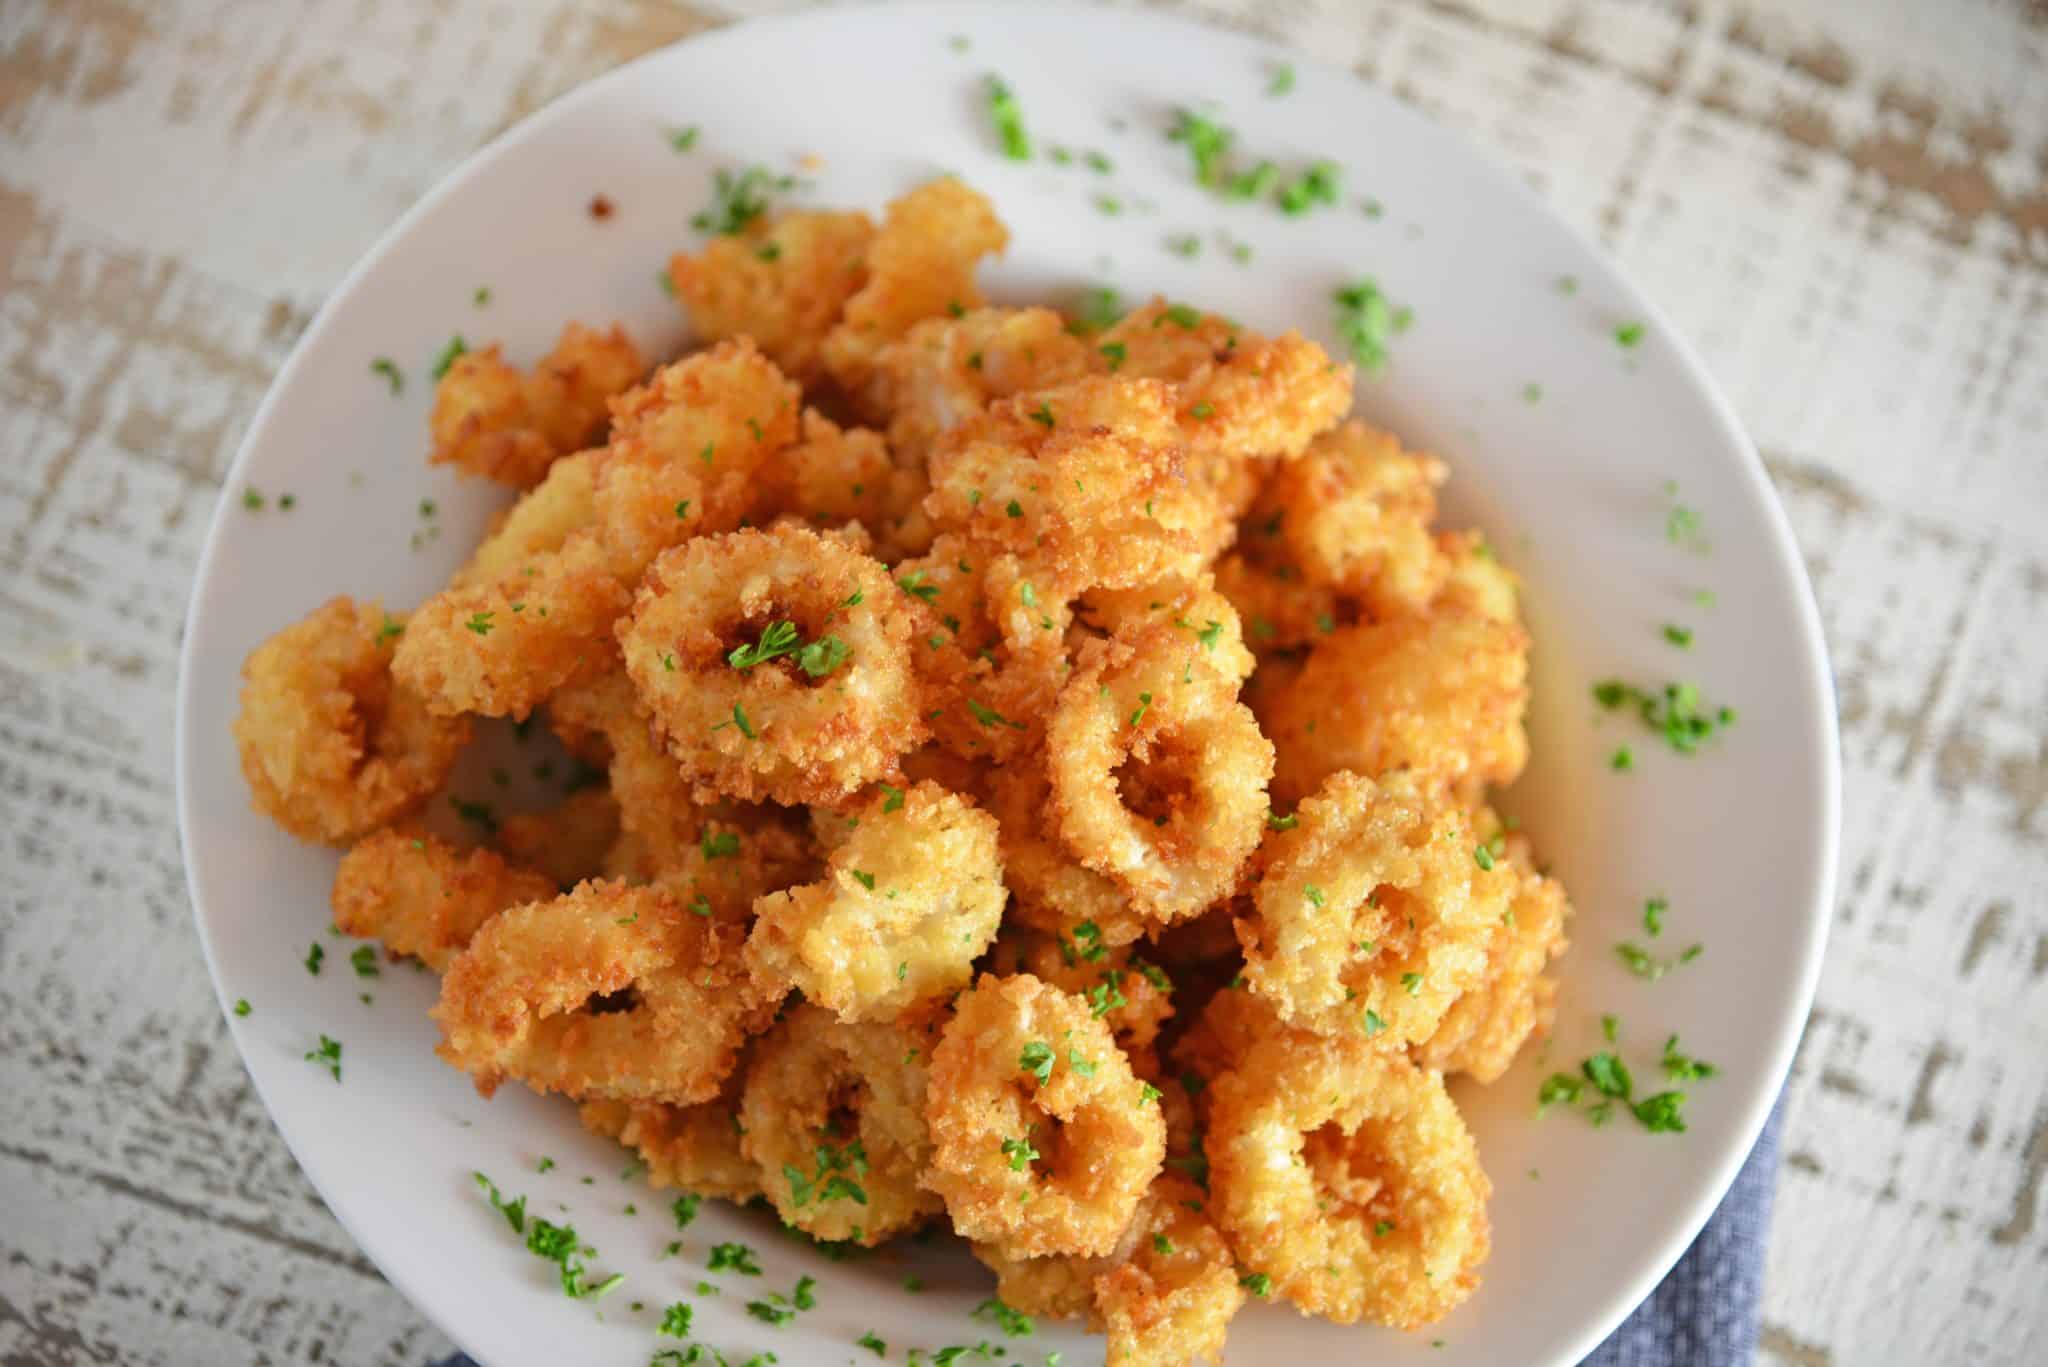 Chimichurri Fried Calamari is a quick and delicious appetizer recipe that can please any crowd! Served with fresh chimichurri sauce, it is a delicious twist. #friedcalamari #easycalamarirecipe www.savoryexperiments.com